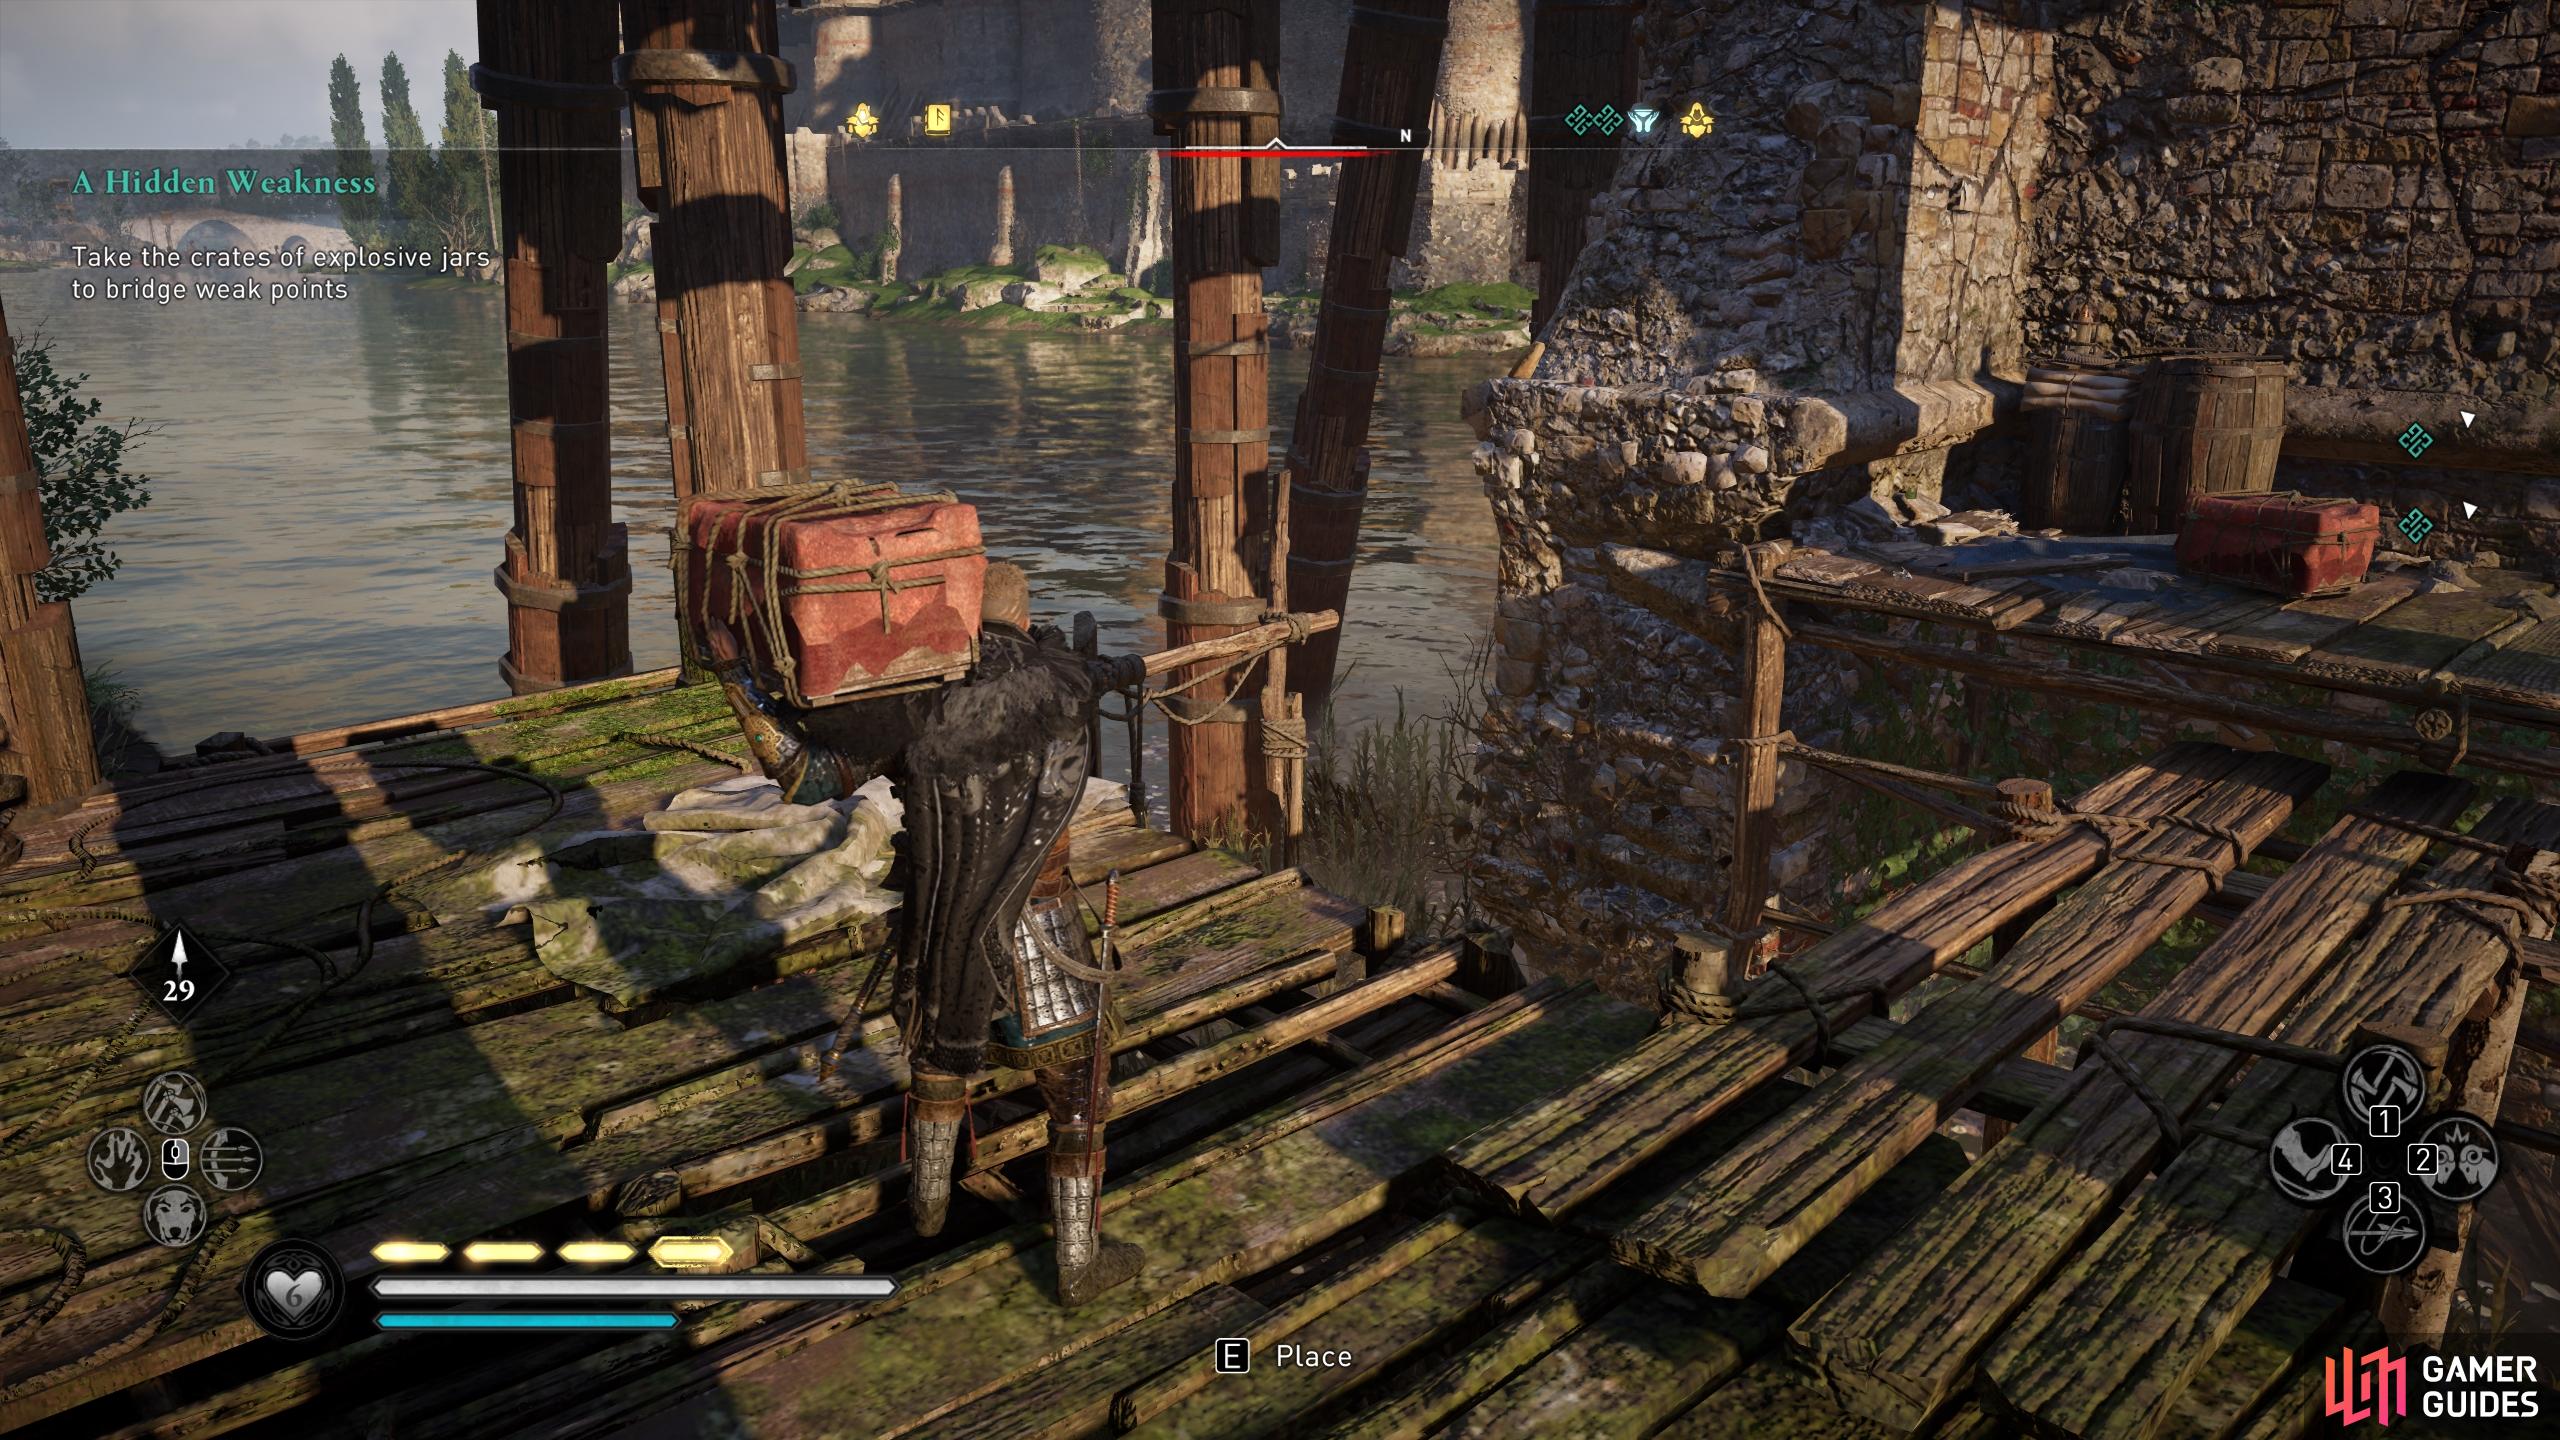 Carry the second crate along the wooden planks on the left side of the bridge.